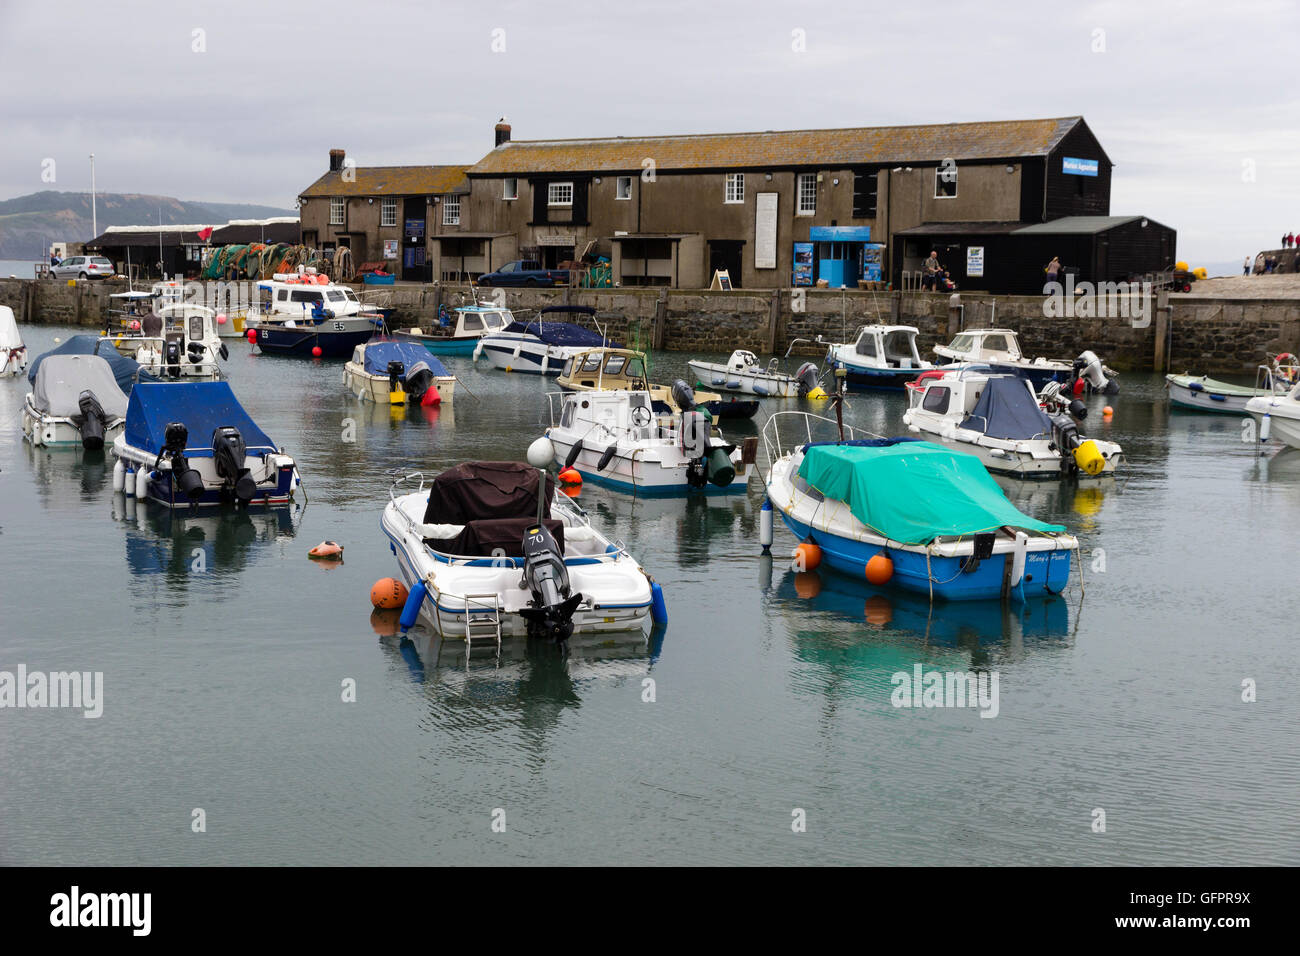 Fishing and pleasure boats moored in the shelter of the Cobb, Lyme Regis, Dorset, UK on a cloudy June day Stock Photo